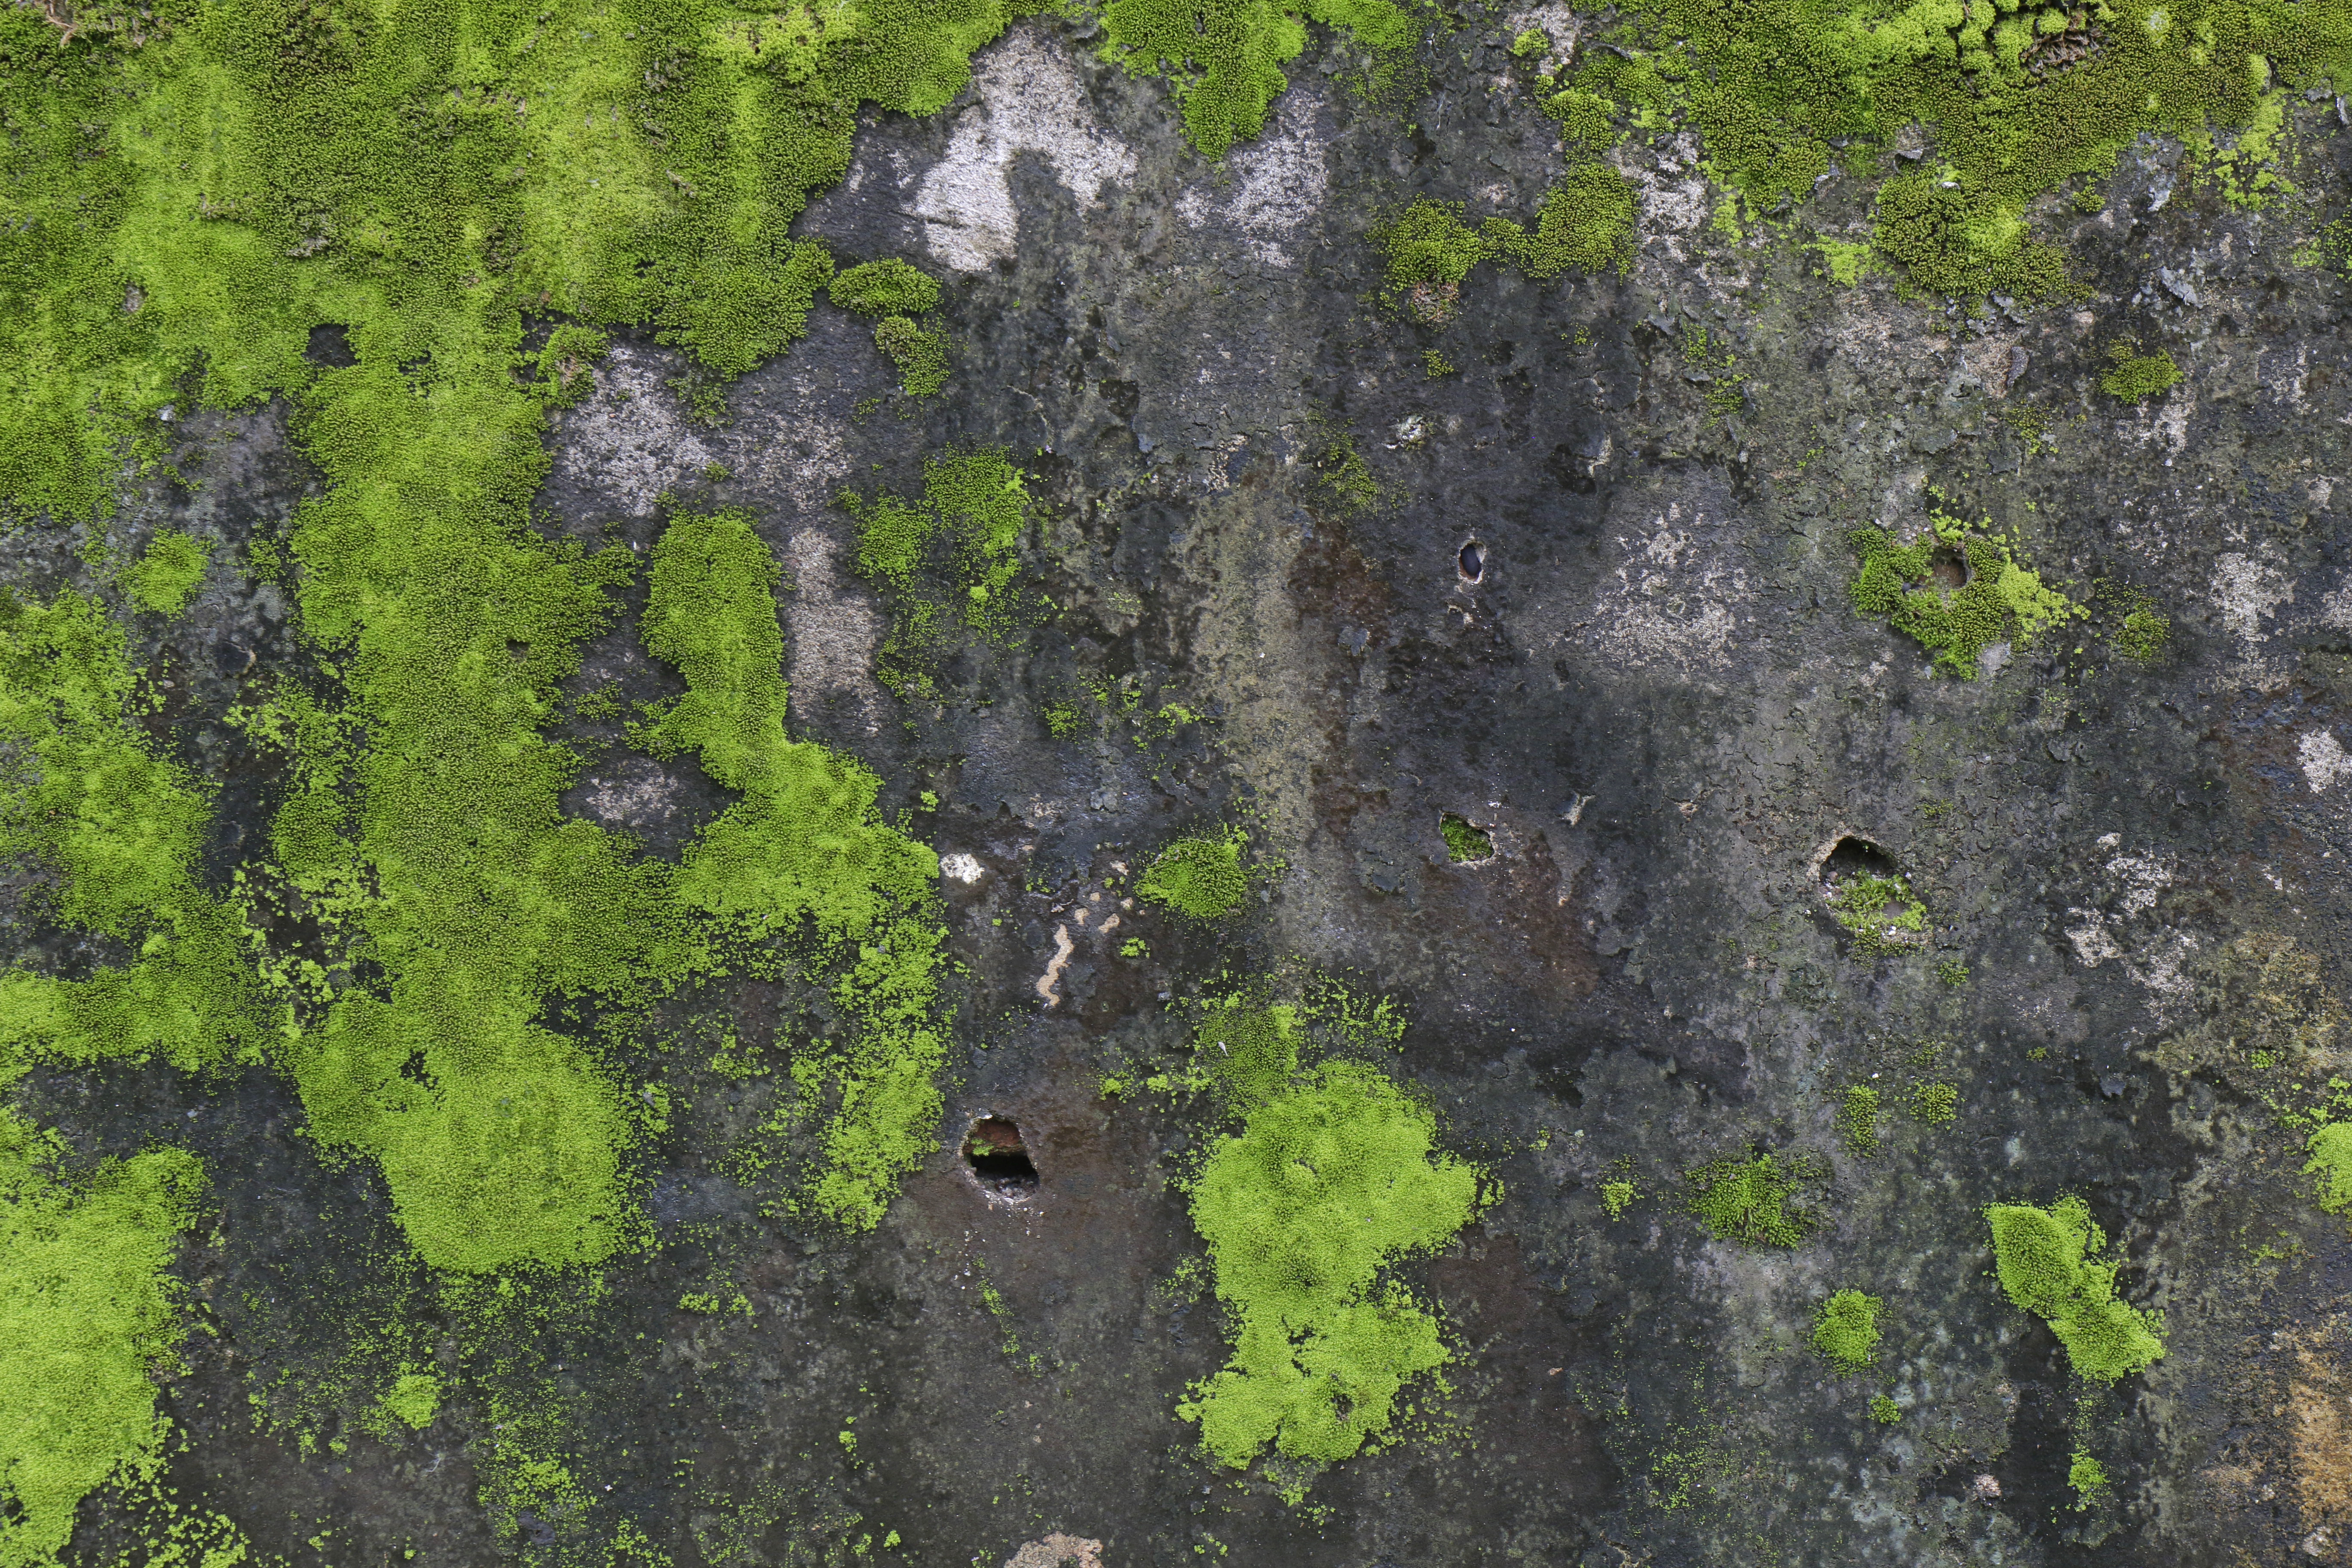 Moss on a concrete surface | Source: Shutterstock